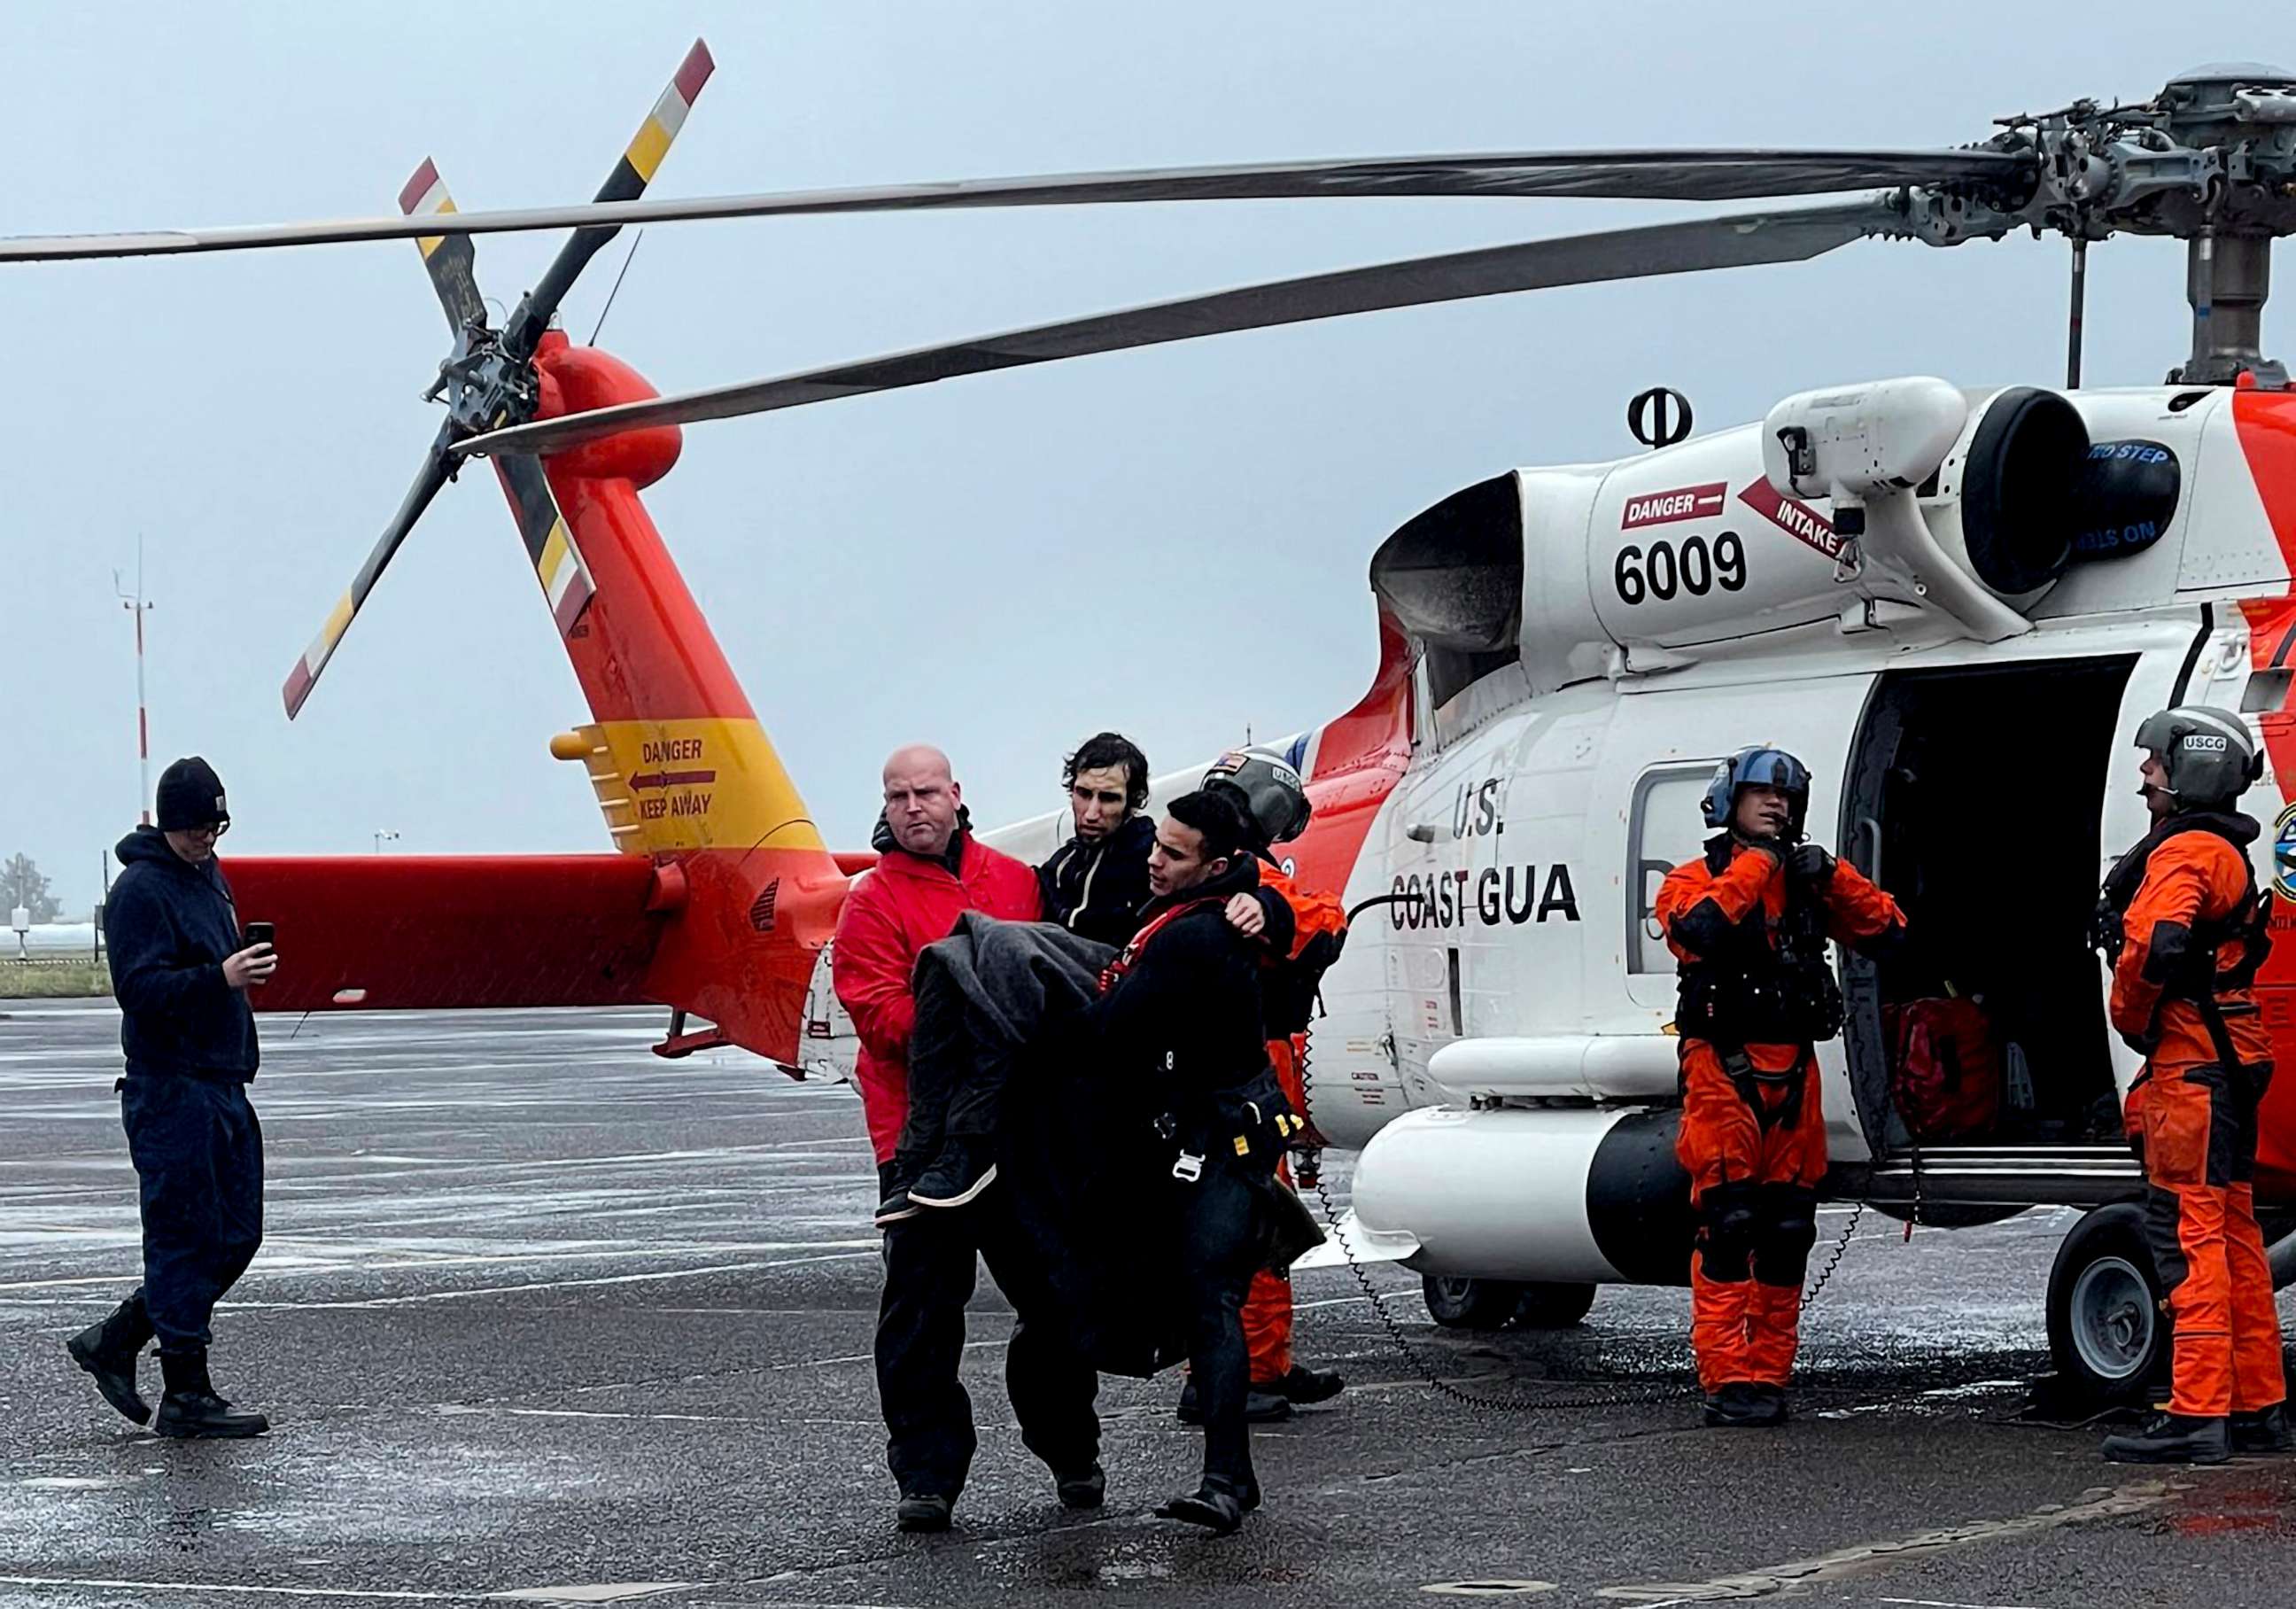 PHOTO: In this photo provided by the U.S Coast Guard Pacific Northwest, Coast Guard personnel help carry a swimmer from a rescue helicopter after he was rescued from the mouth of the Columbia River on Feb. 3, 2023, at Coast Guard Base Astoria, Oregon.